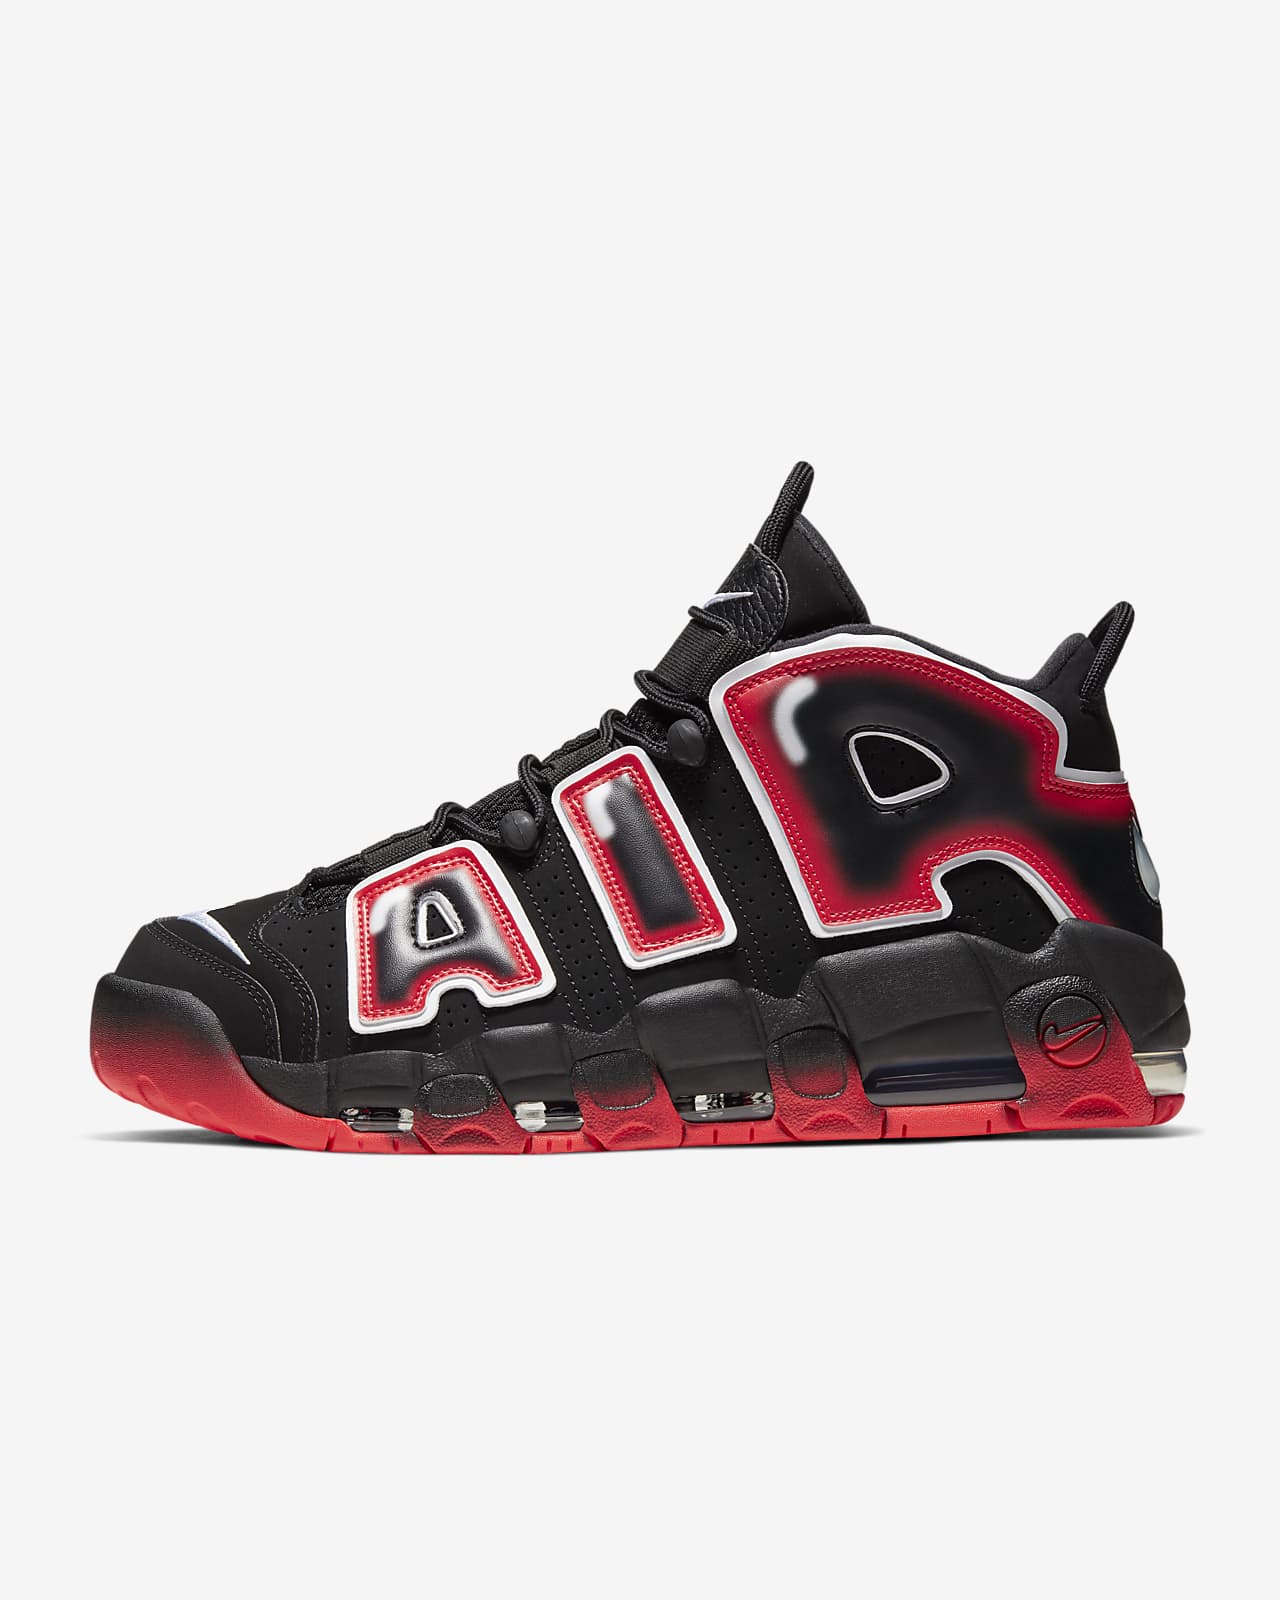 nike air much uptempo 1996